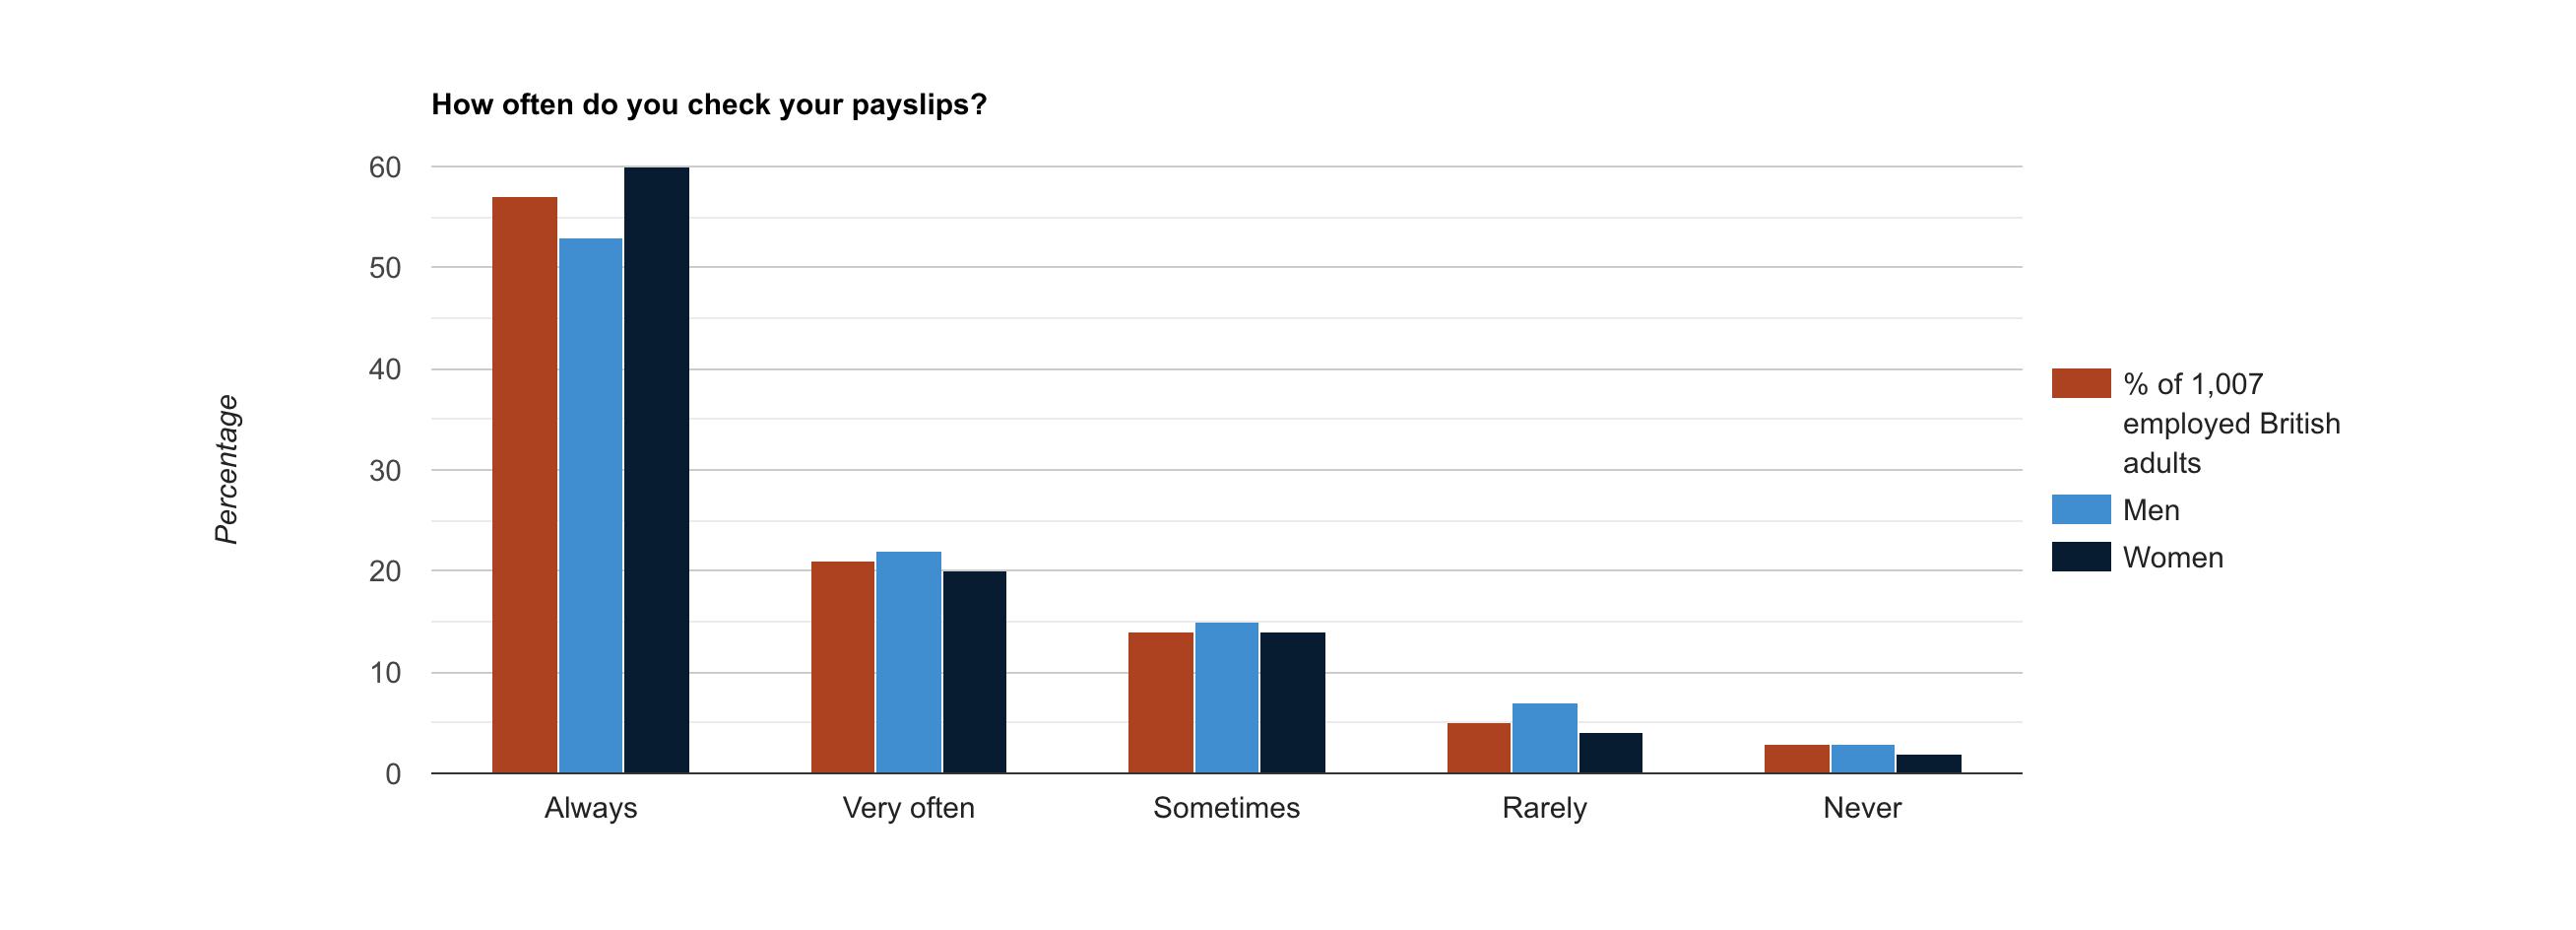 How often do you check your payslips?